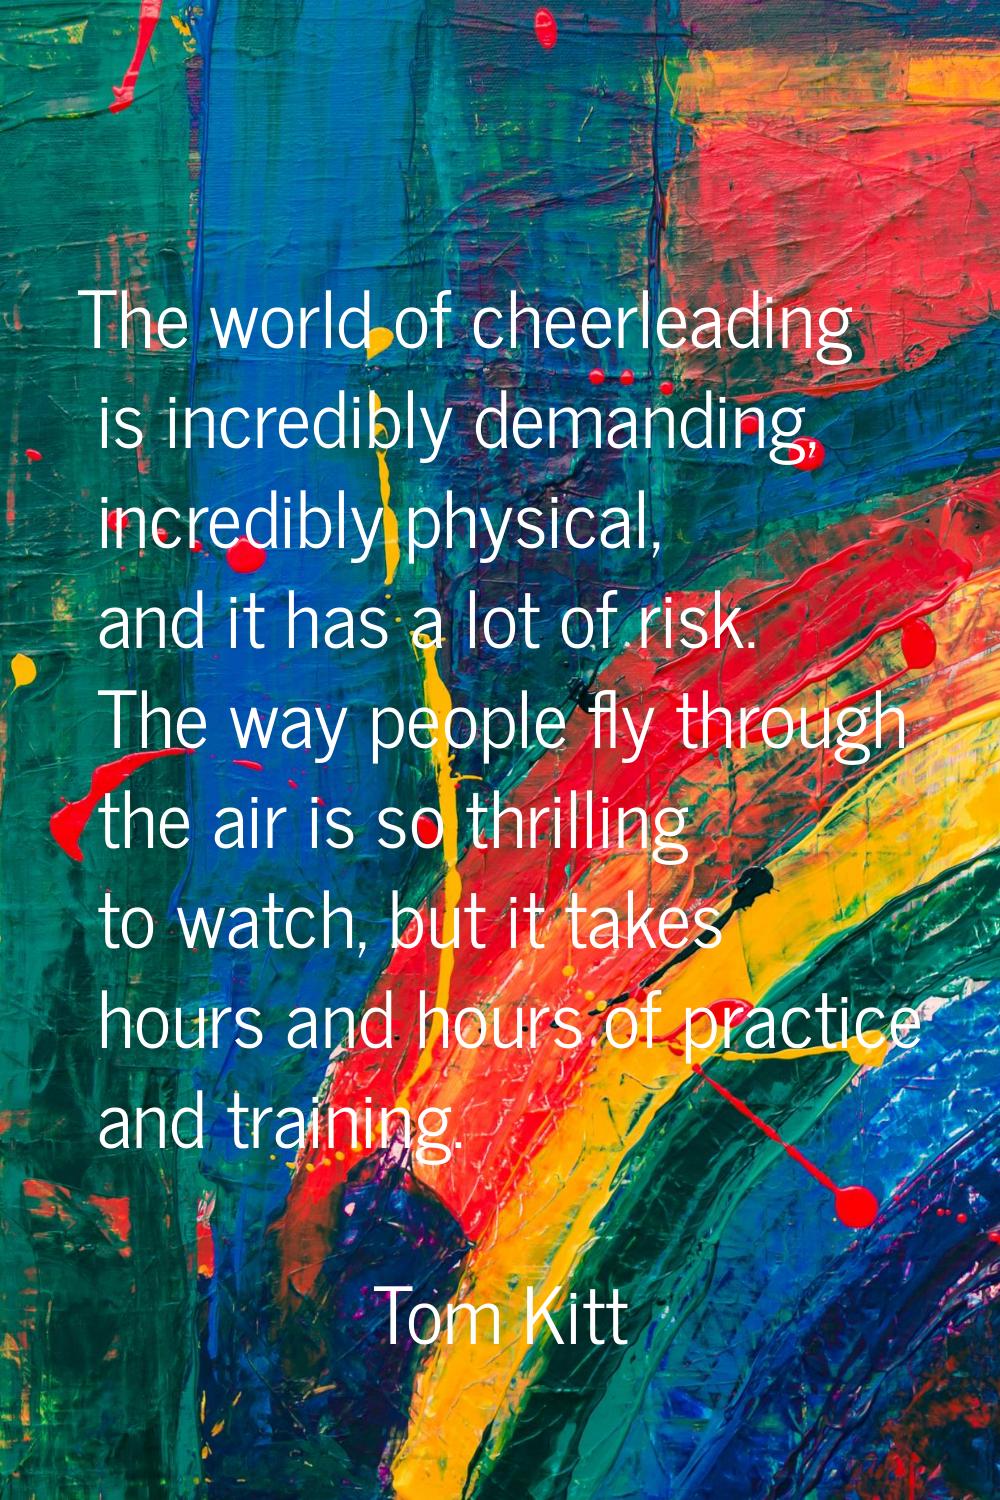 The world of cheerleading is incredibly demanding, incredibly physical, and it has a lot of risk. T